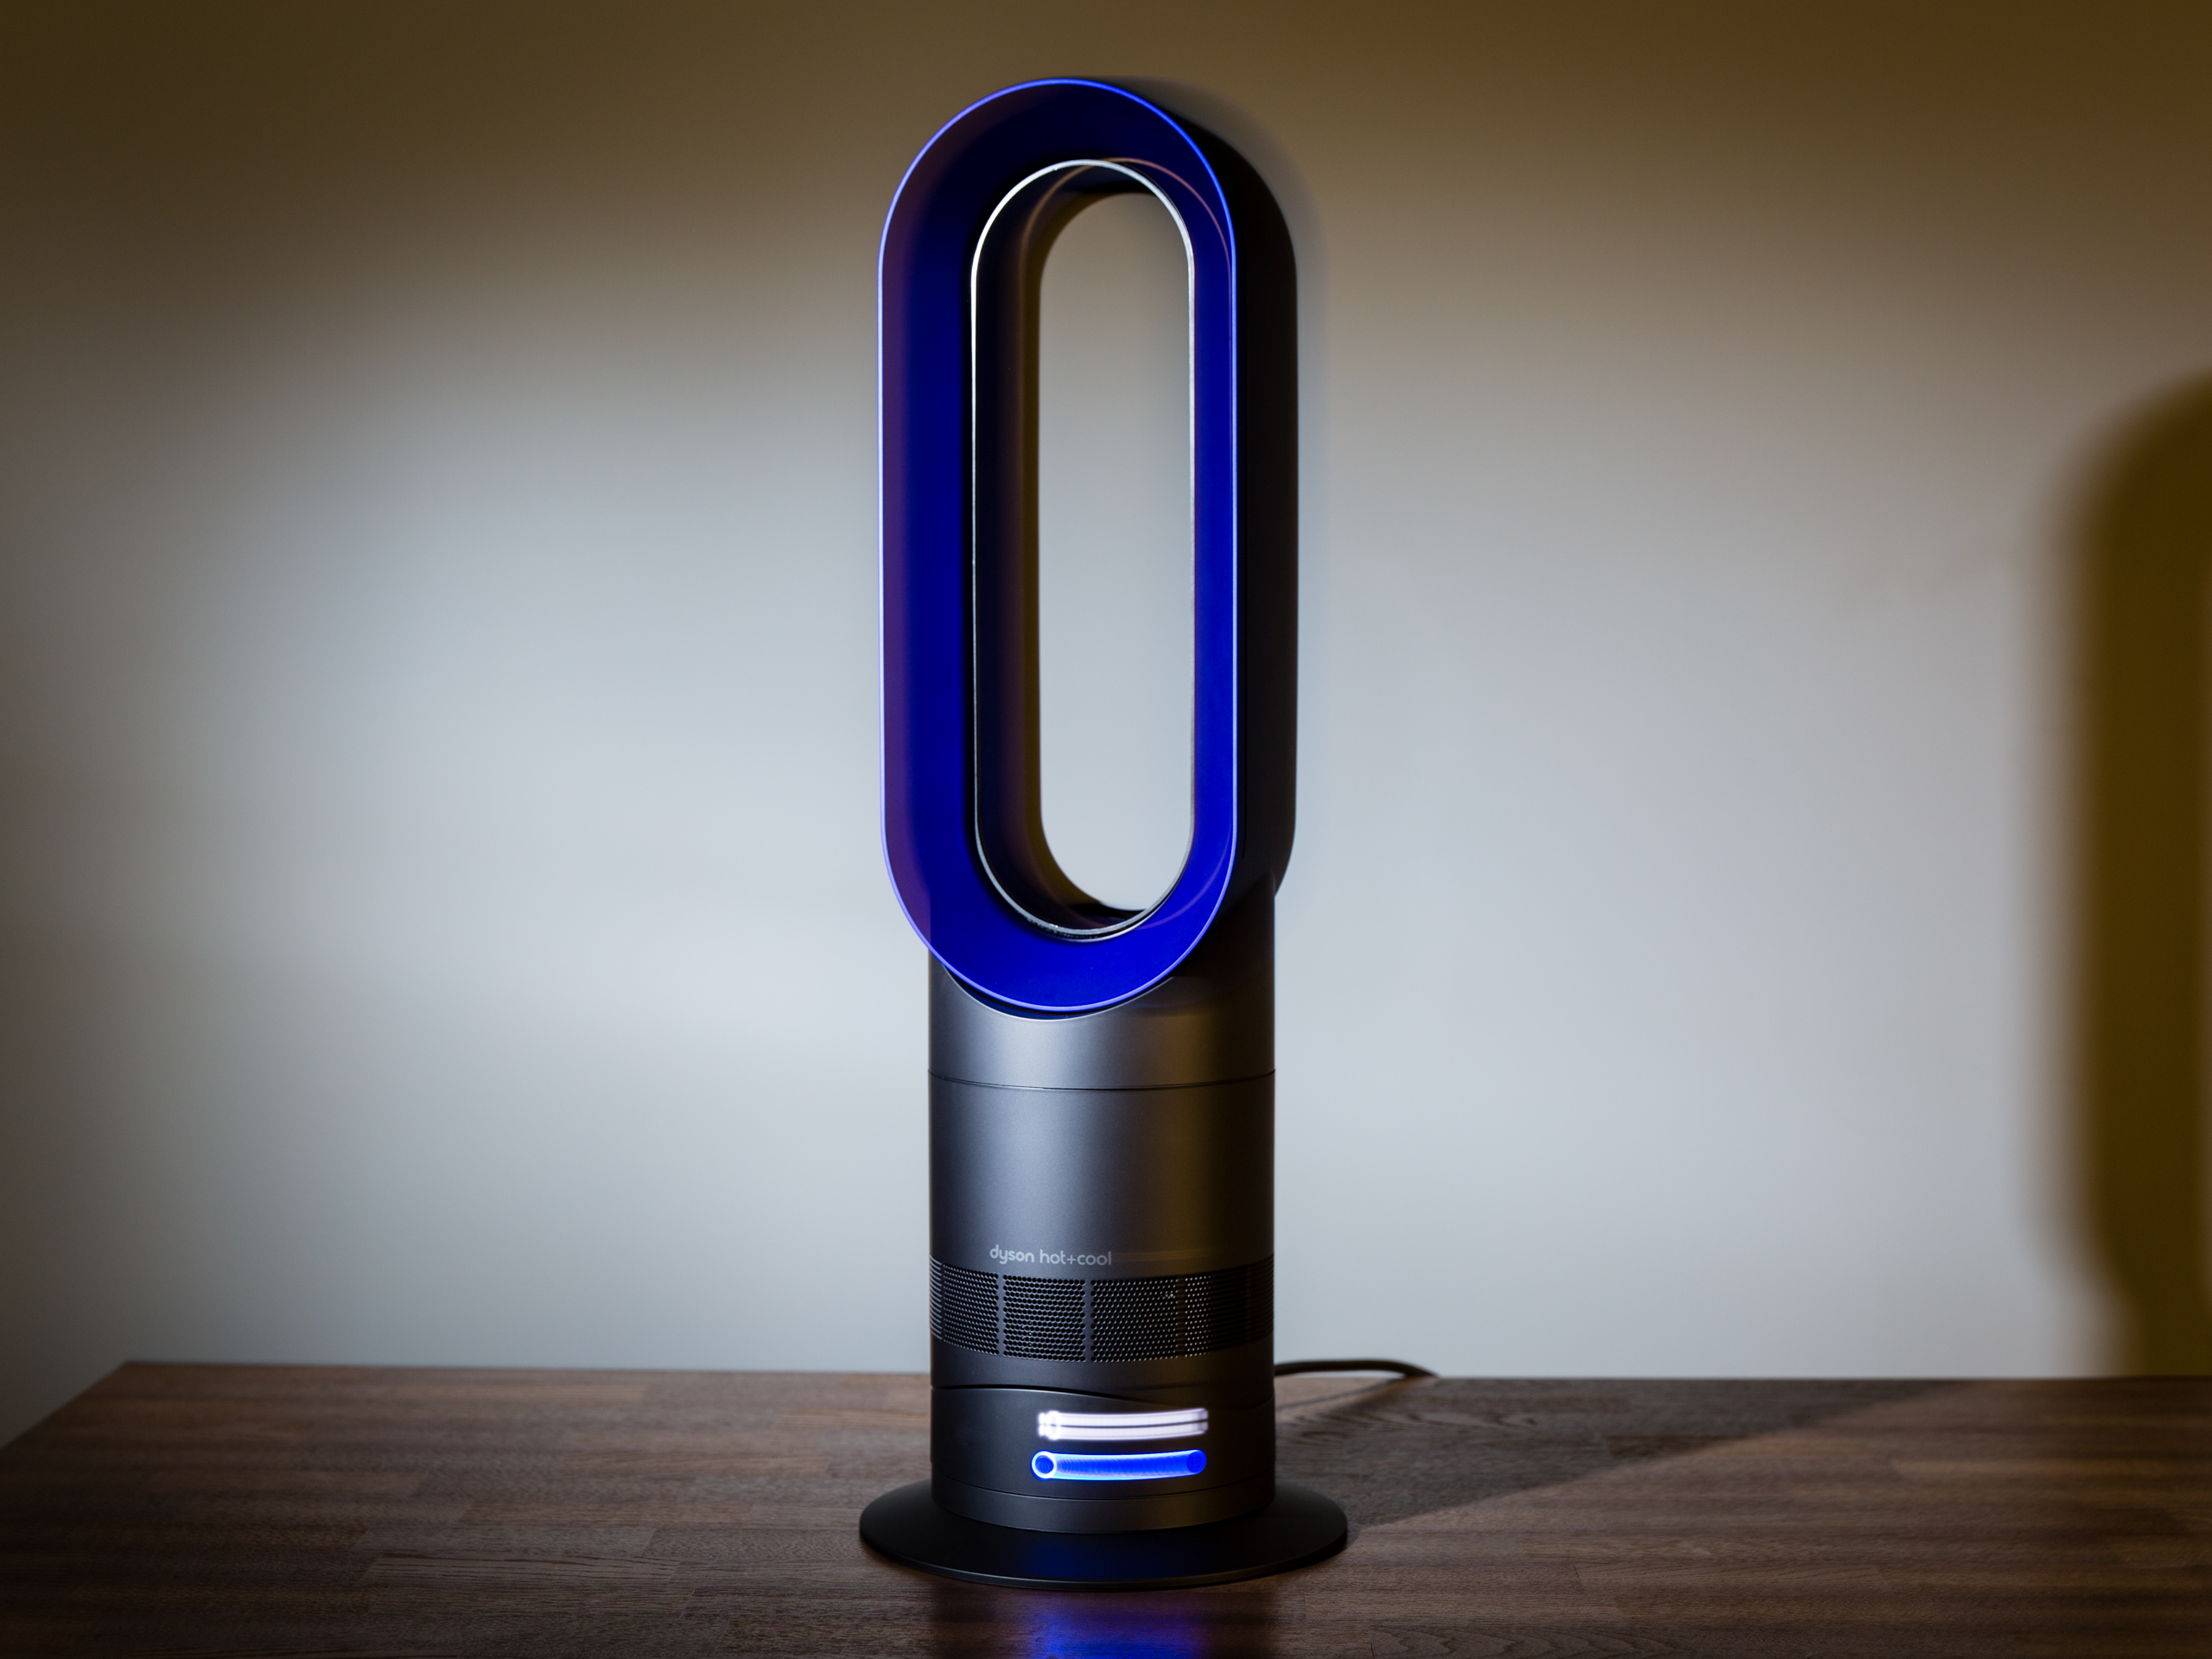 Buy Dyson Hot Cool | UP TO 50% OFF